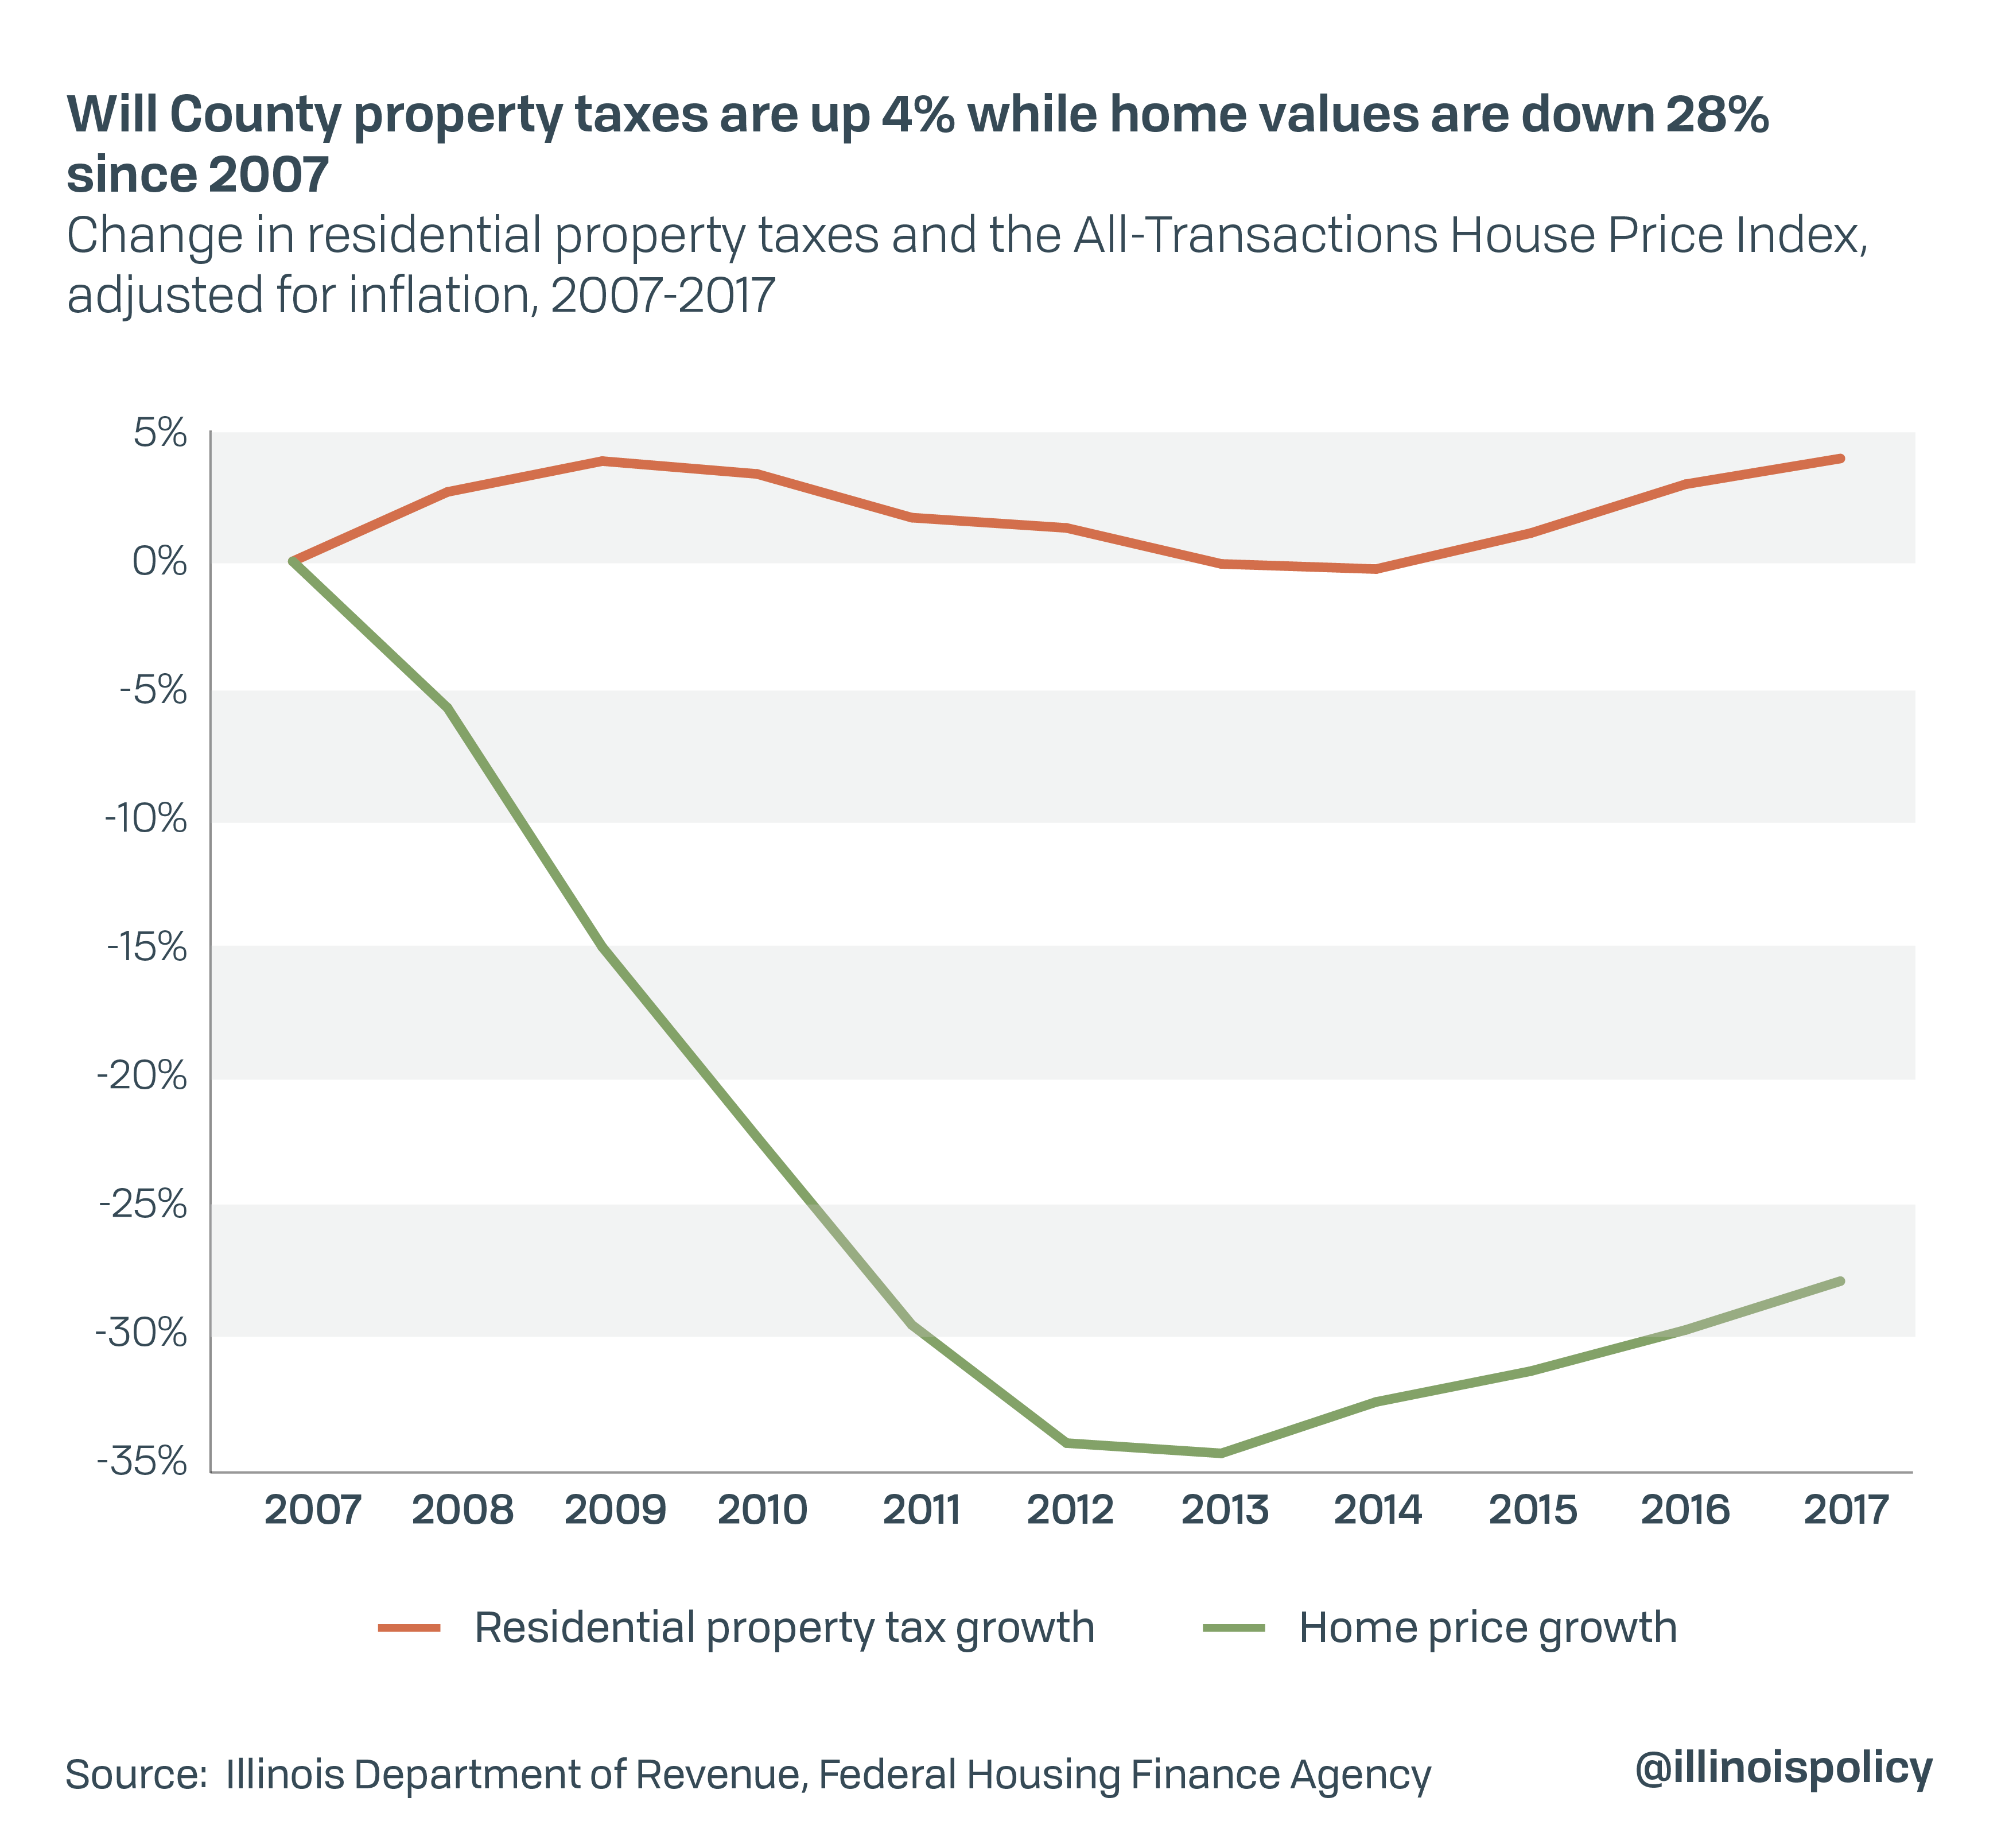 Will County Home Values Down 28 Property Taxes Up 4 Since Recession